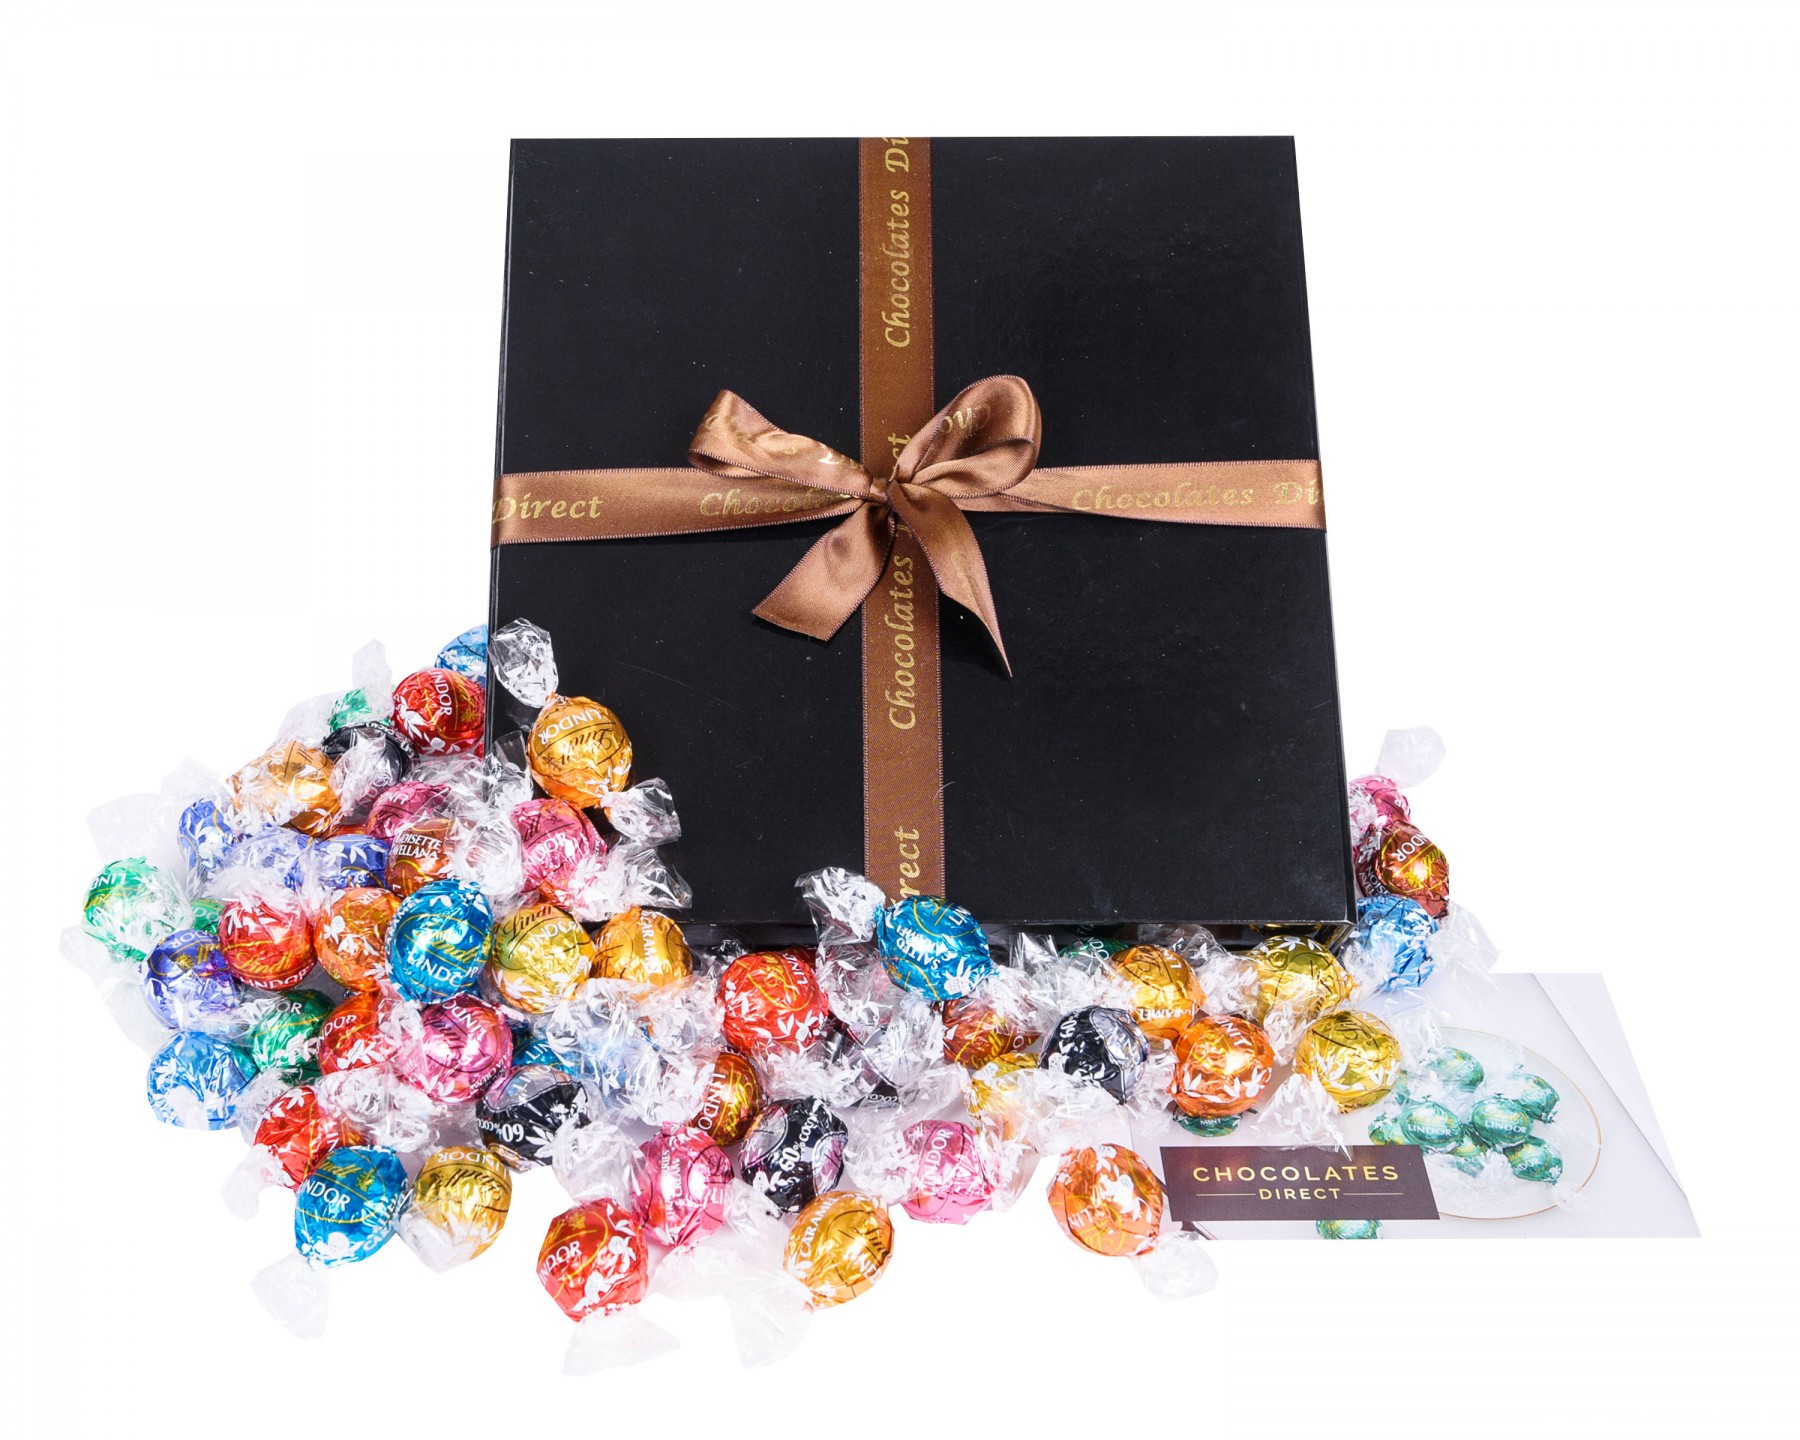 Amazon.com : Lindt LINDOR Assorted Chocolate Truffles 90 Count Easter Candy  Gift Box, Chocolate Candy with Smooth, Melting Truffle Center, 38.4 oz. Box  : Everything Else